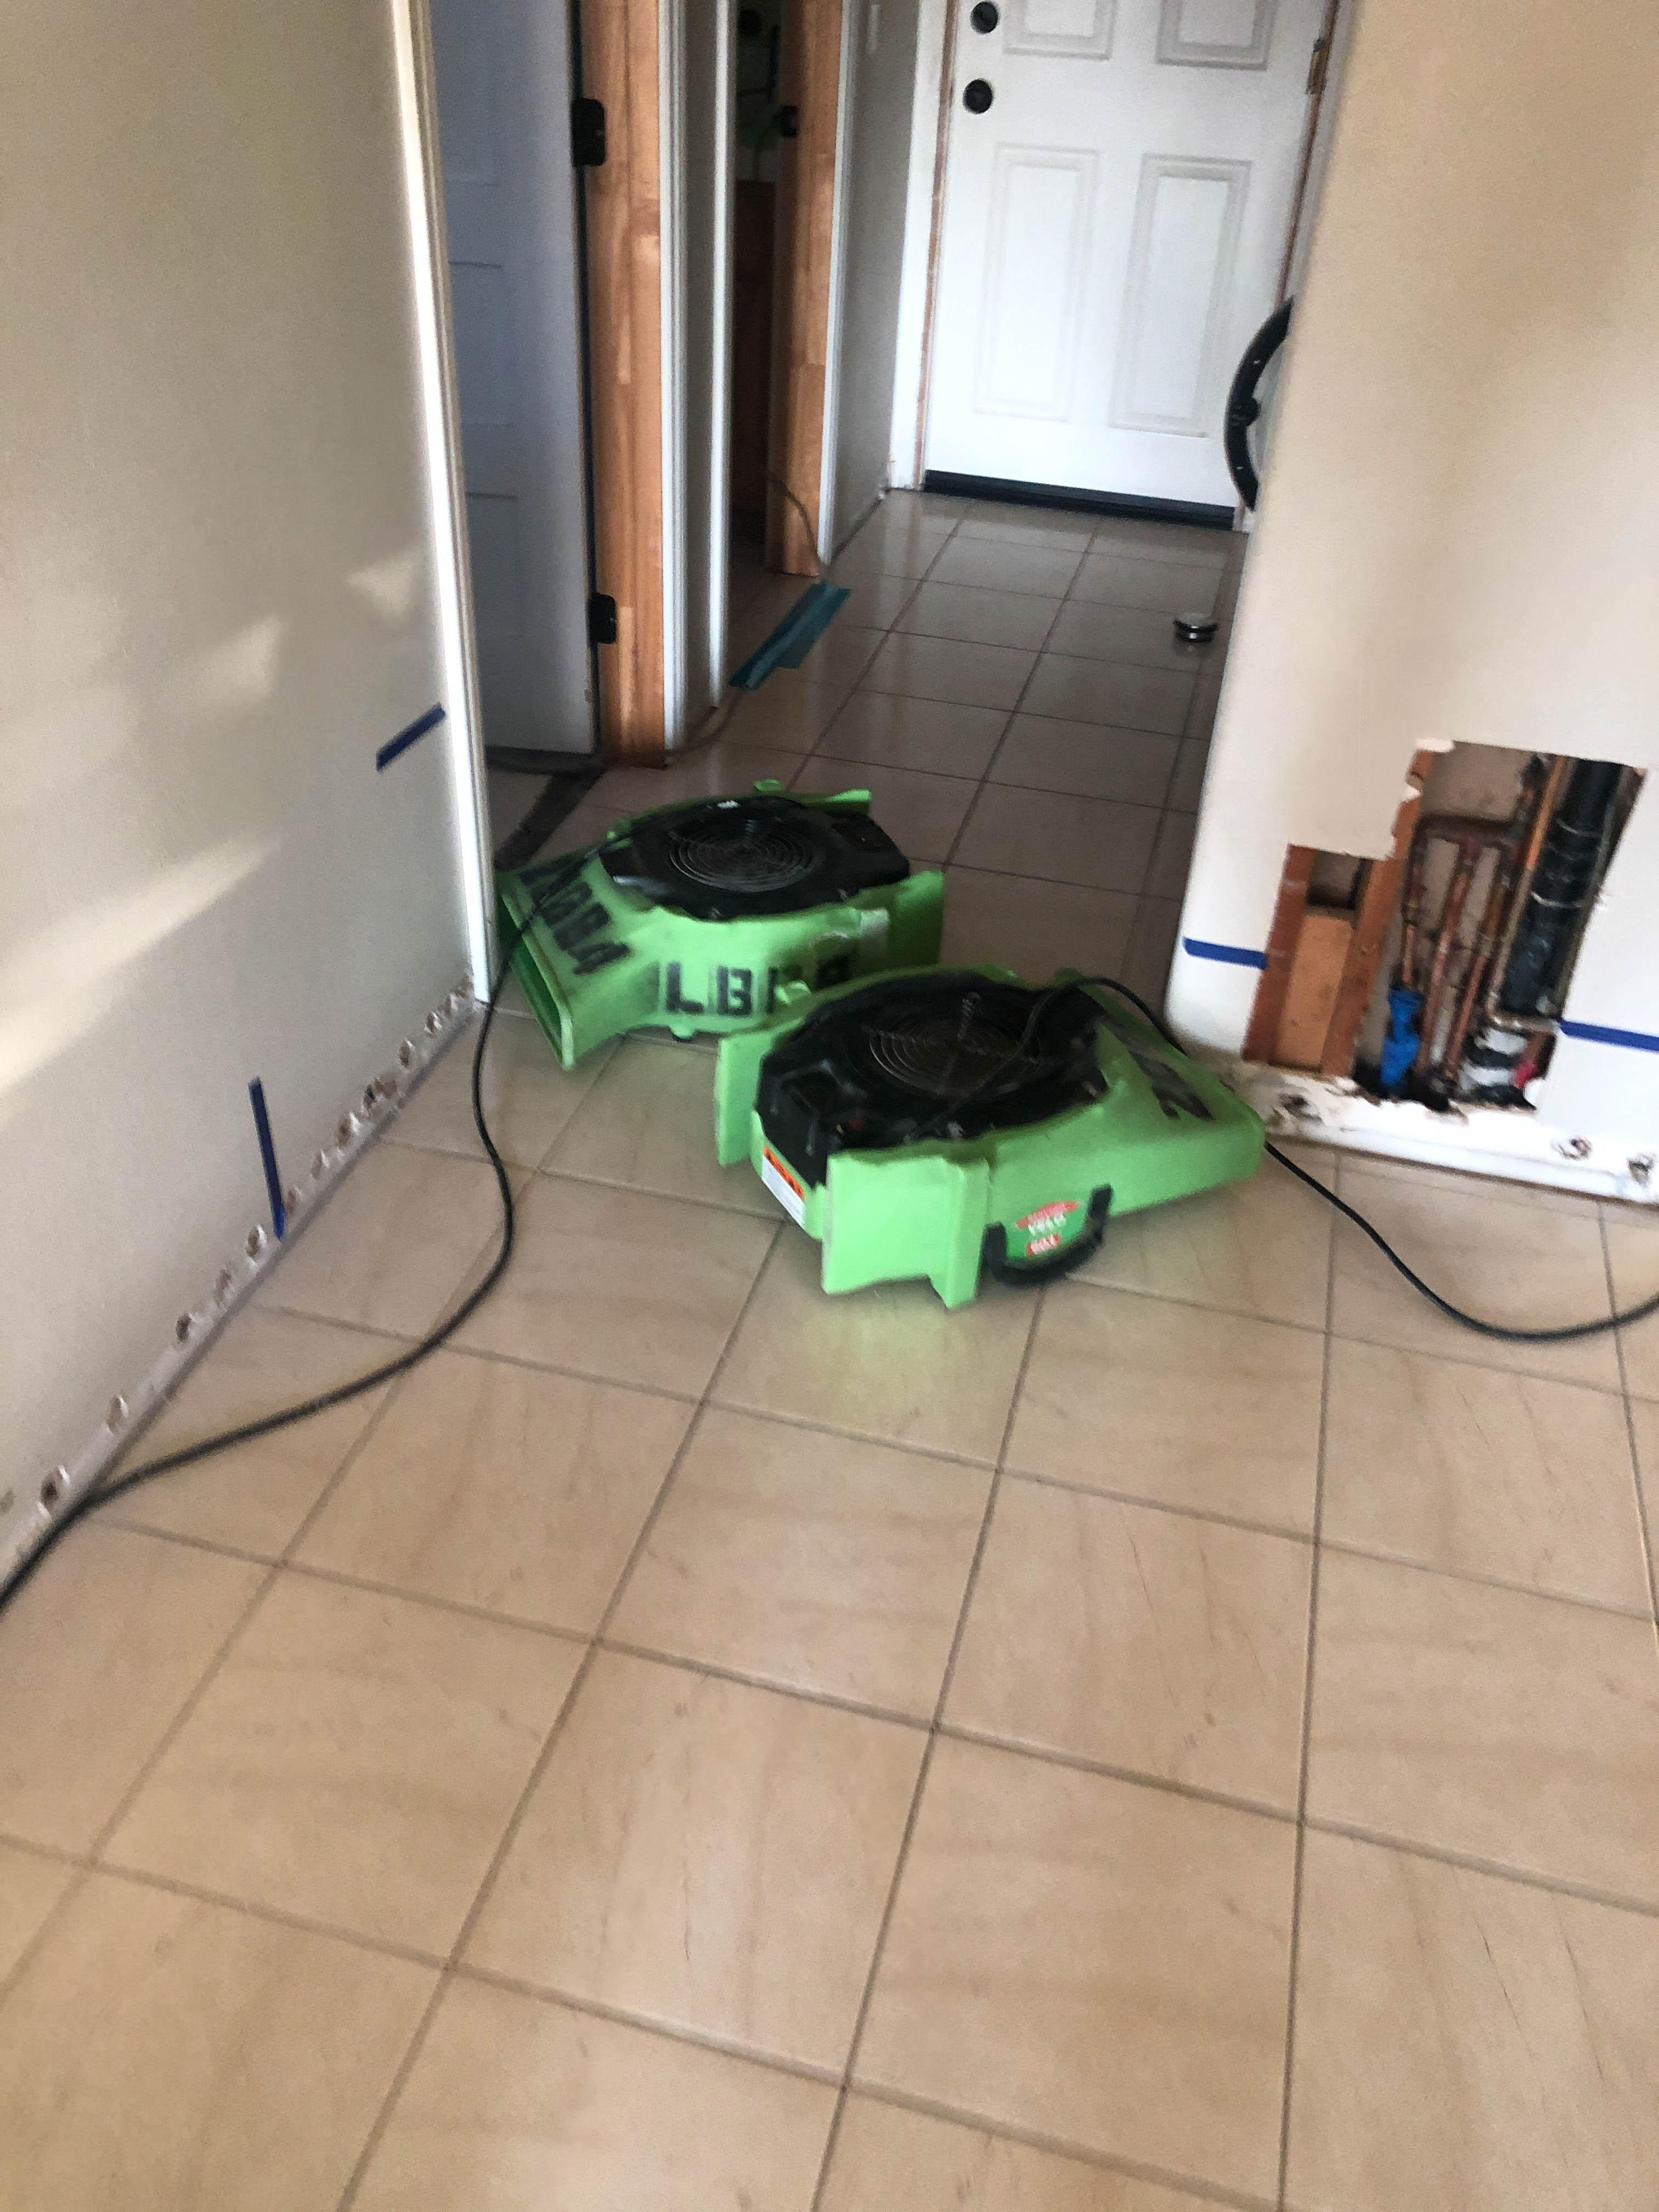 SERVPRO of Laguna Beach is a company that specializes in water, fire, and mold remediation. Our top aim is to restore your property.